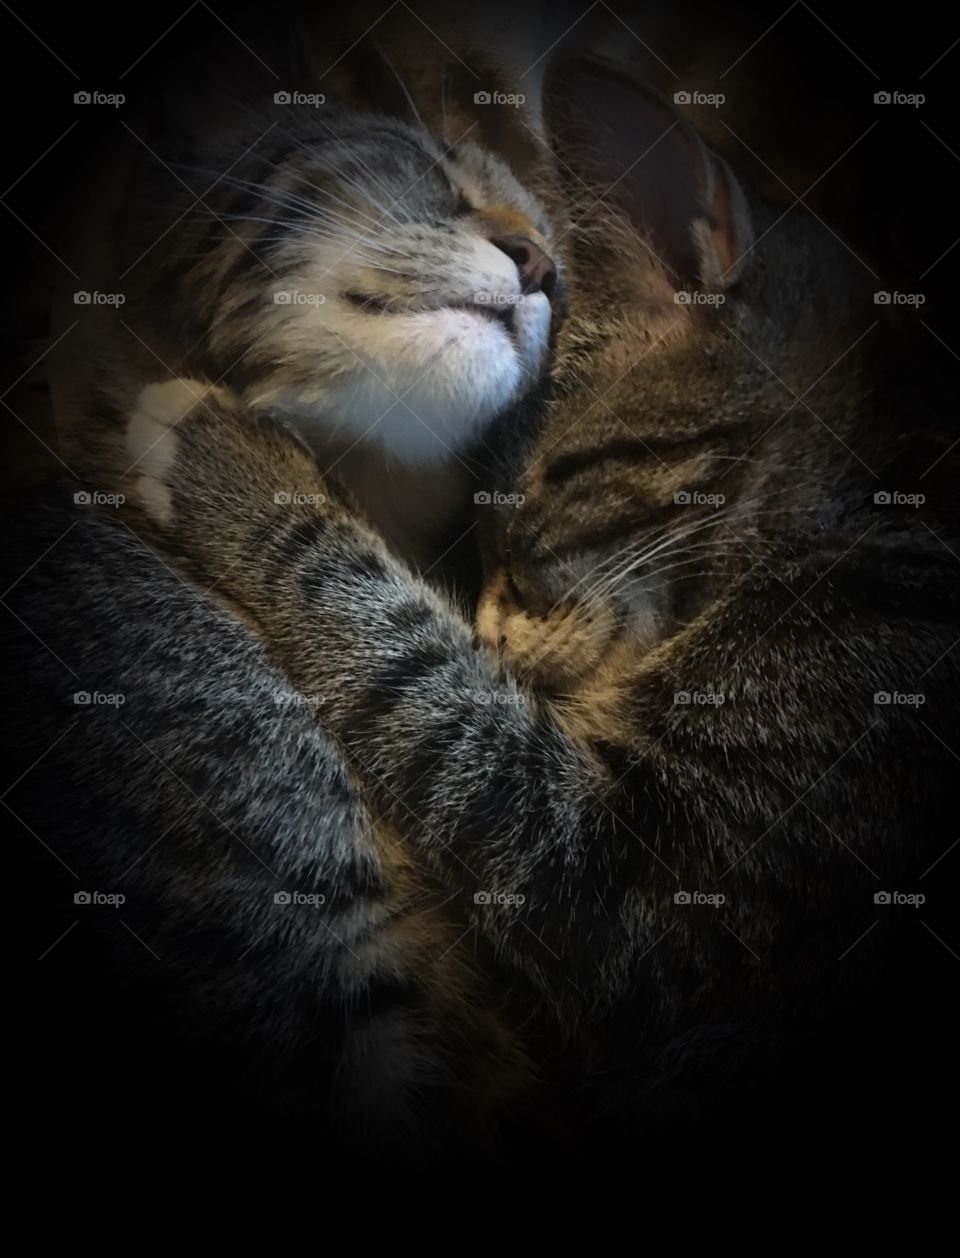 Cats holding one another